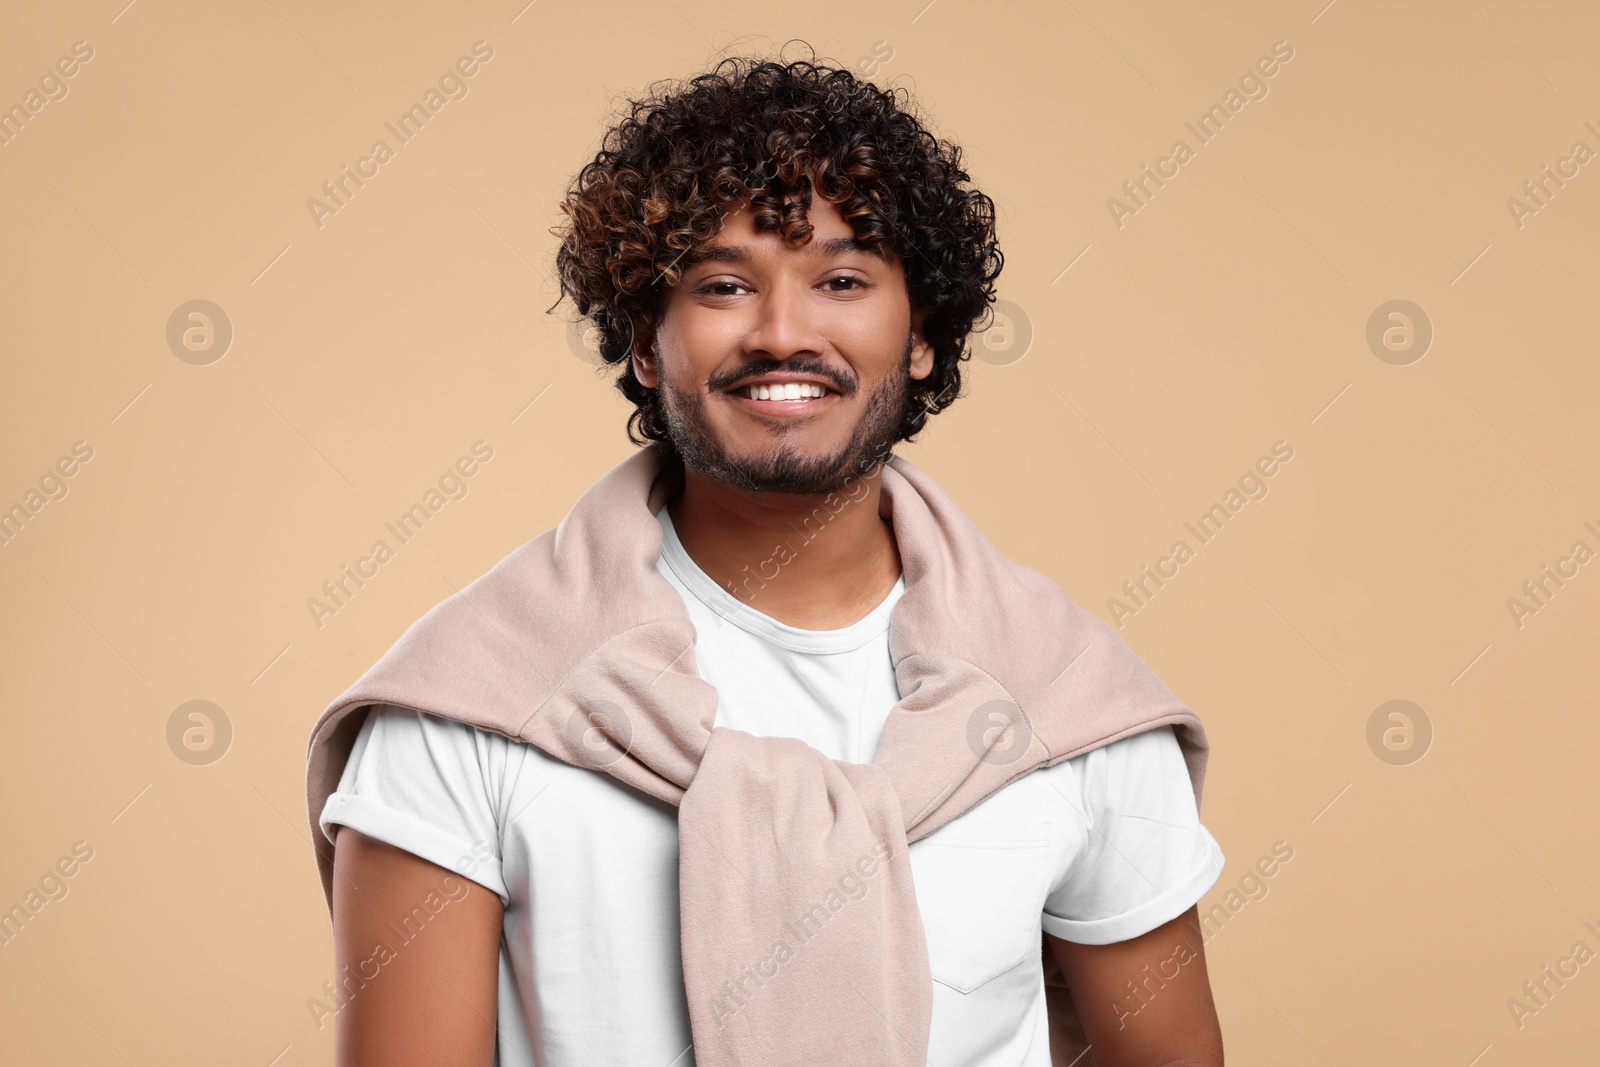 Photo of Handsome young smiling man on beige background